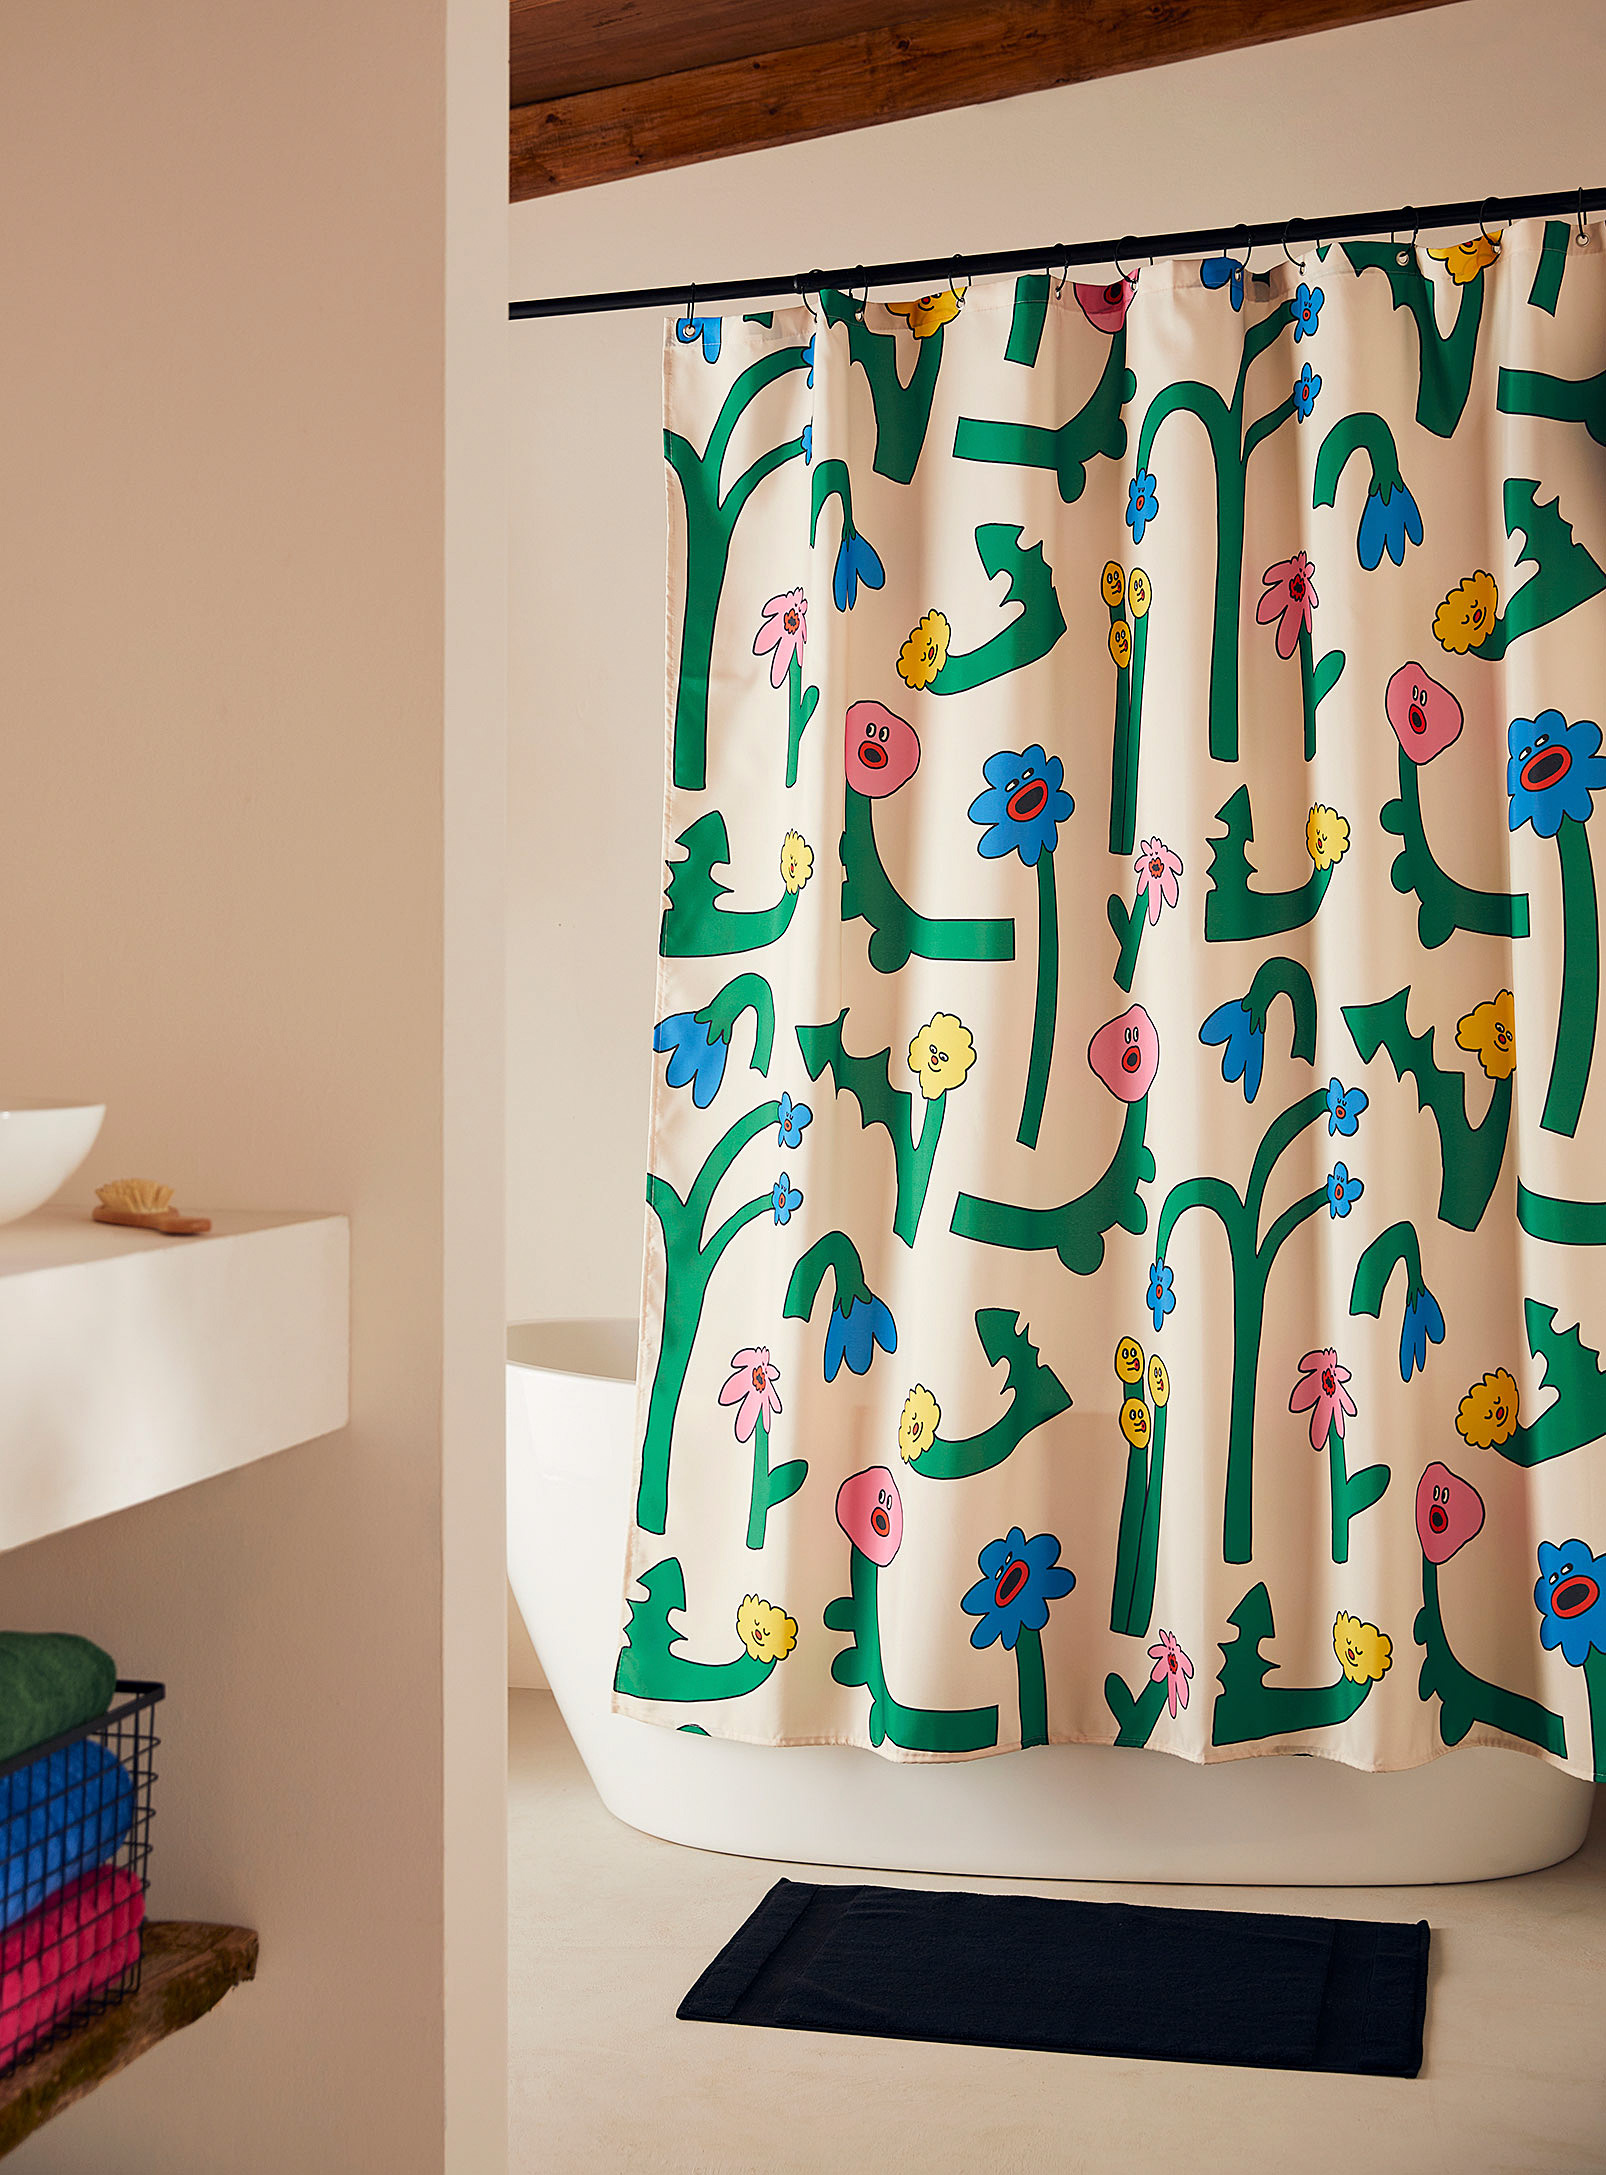 Costume de bain - Singing flowers shower curtain In collaboration with the artist Pony